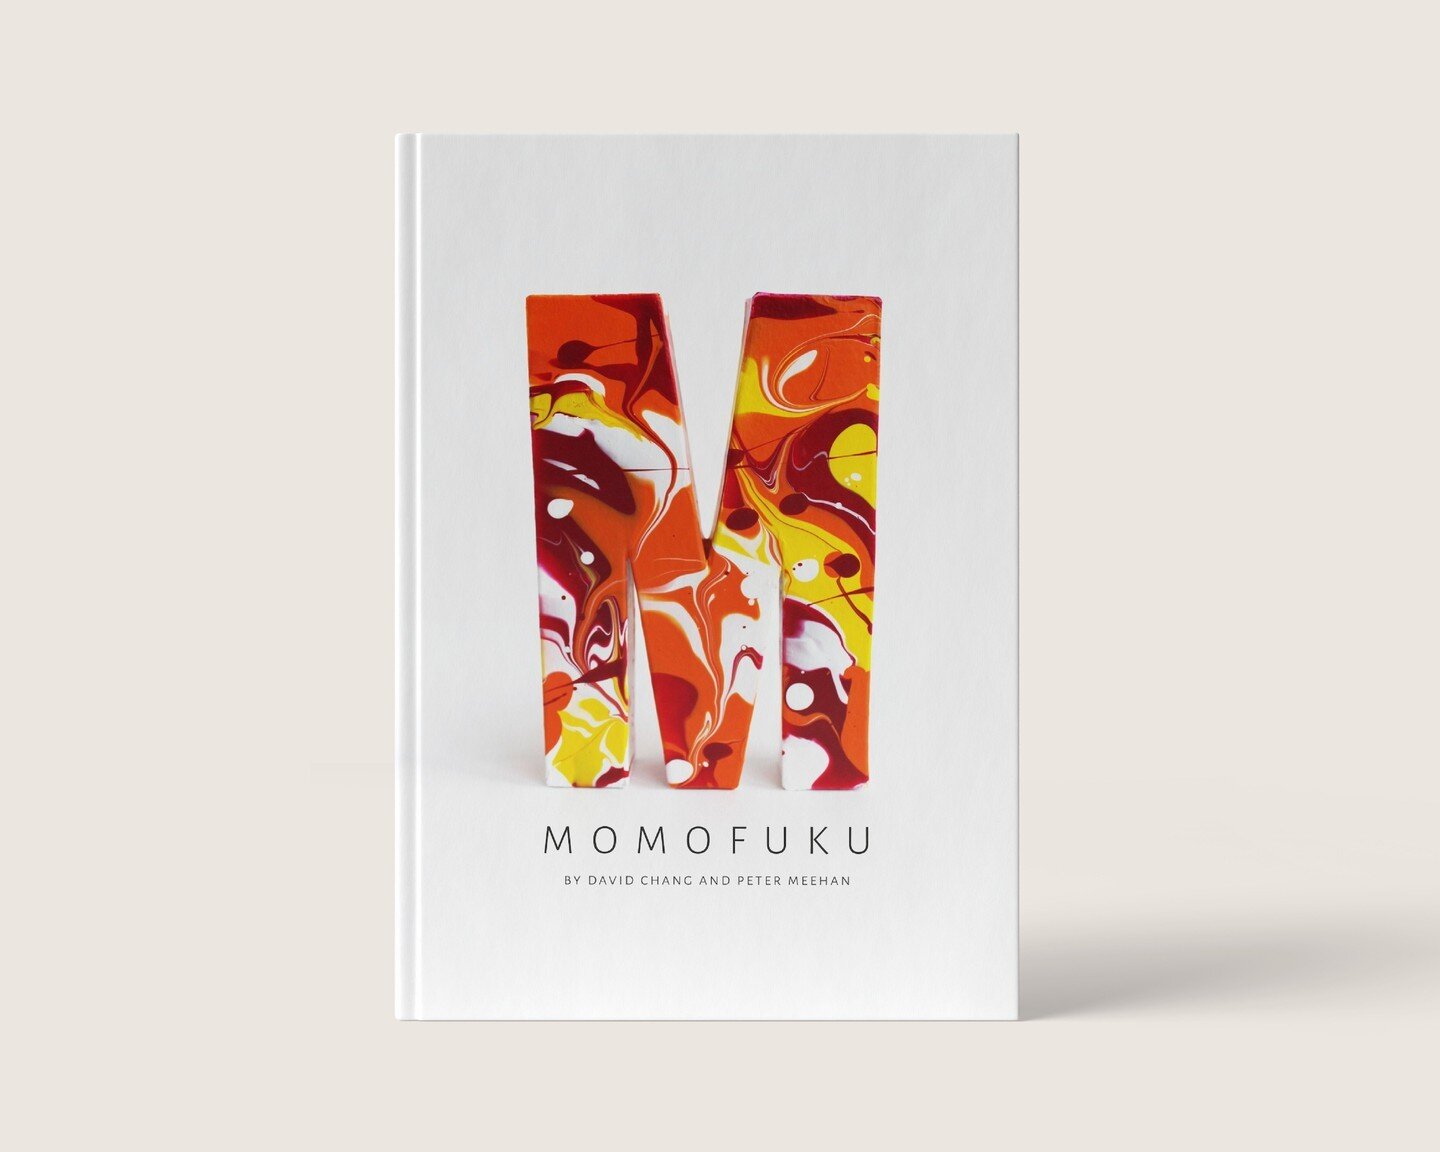 Handmade approach for the cover of David Chang's cookbook.

Momofuku is a cookbook where Asian and American cuisine is fused together to create new bold flavors and recipes. David Chang, the author, made his art accessible for everyone to try. This f